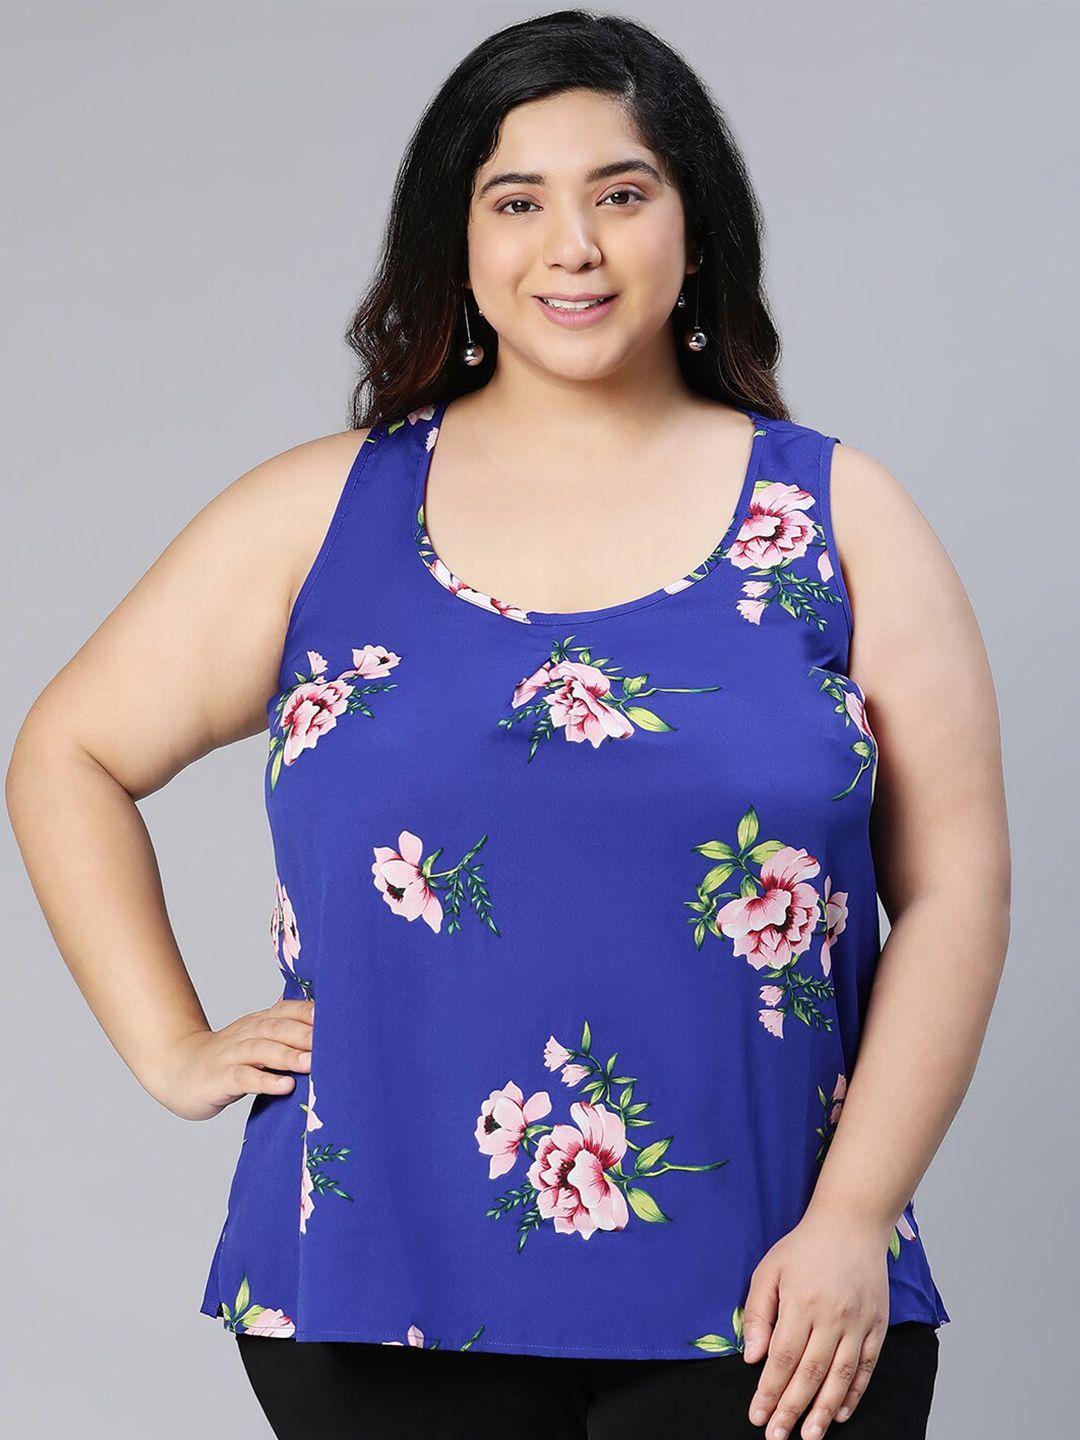 oxolloxo-plus-size-floral-printed-sleeveless-top